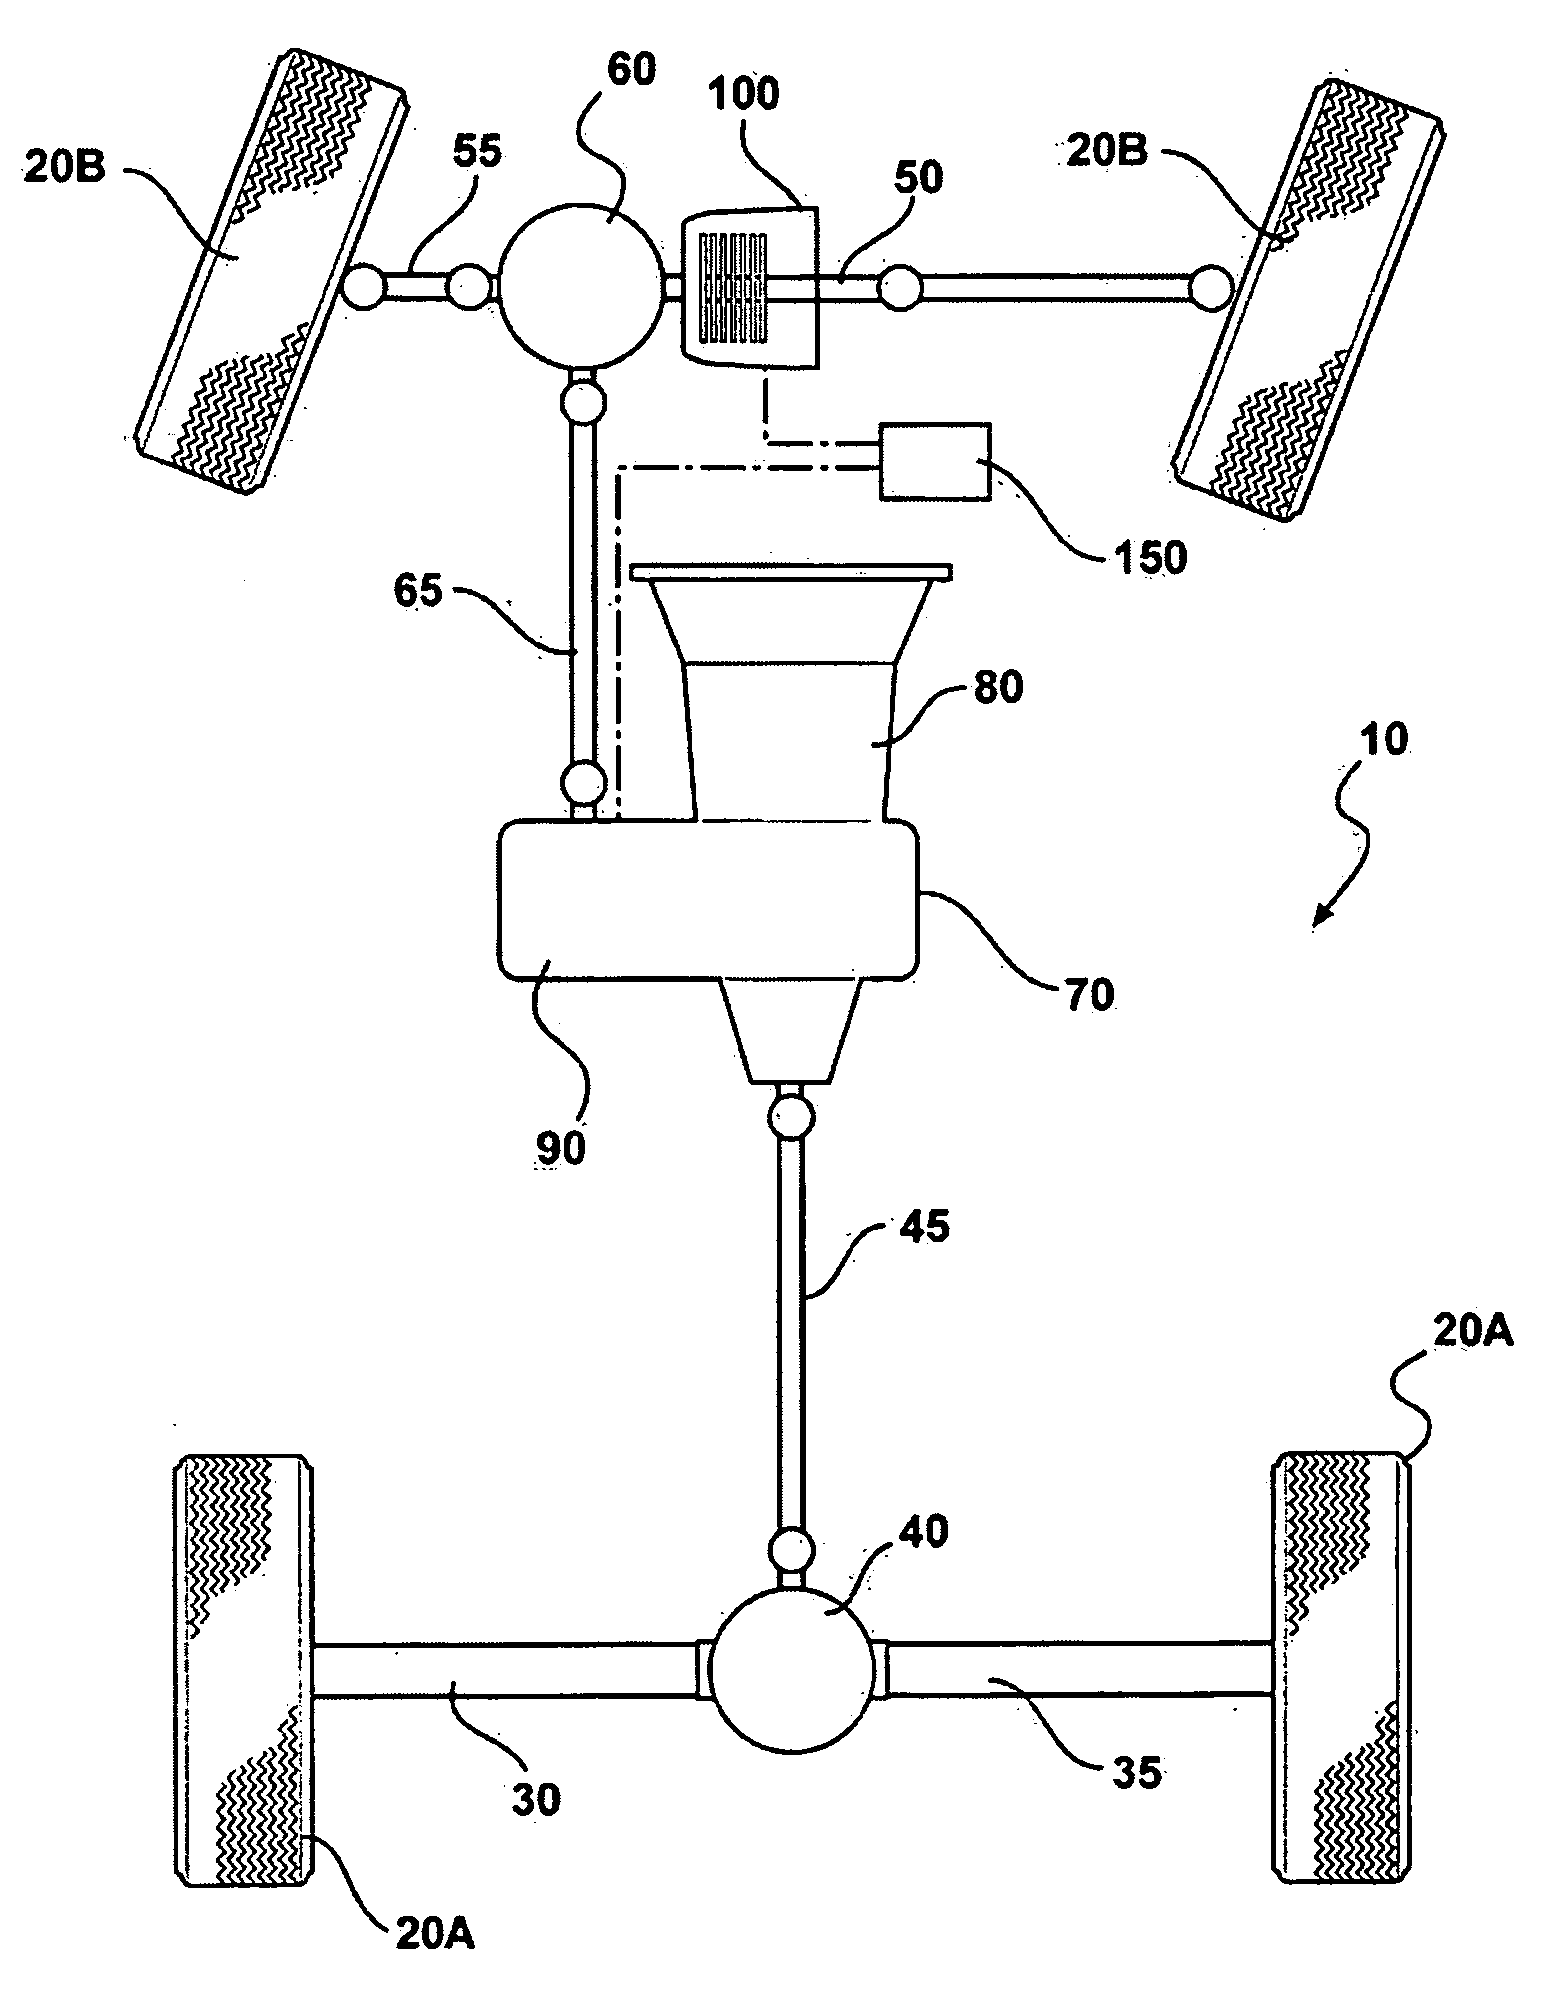 Secondary drive axle disconnect for a motor vehicle